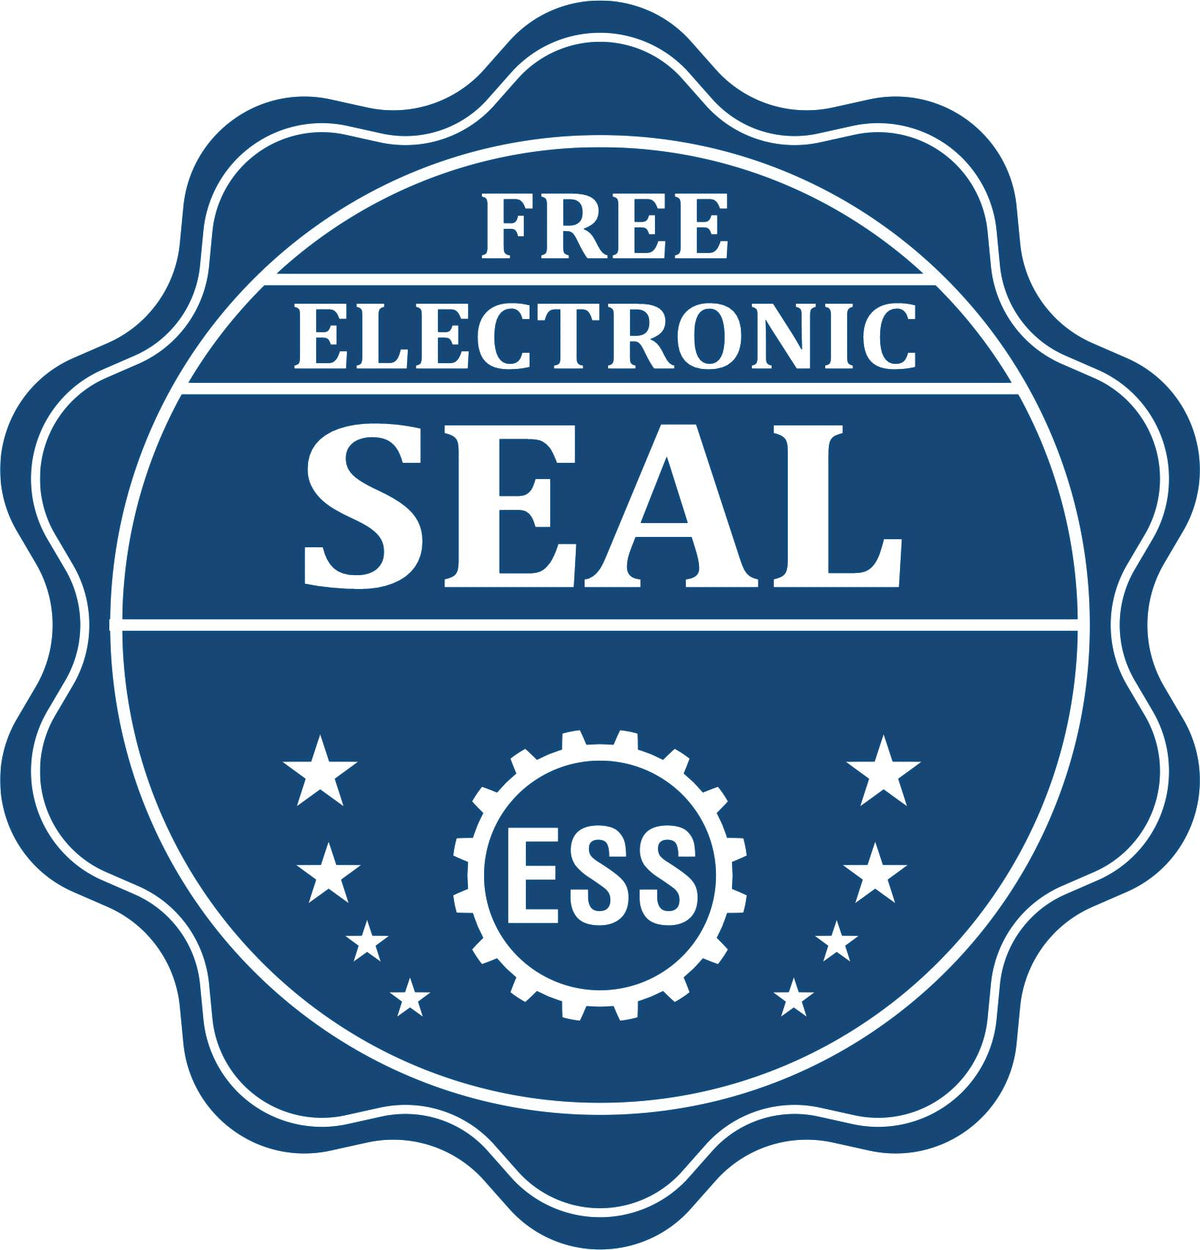 A badge showing a free electronic seal for the Super Slim Rhode Island Notary Public Stamp with stars and the ESS gear on the emblem.